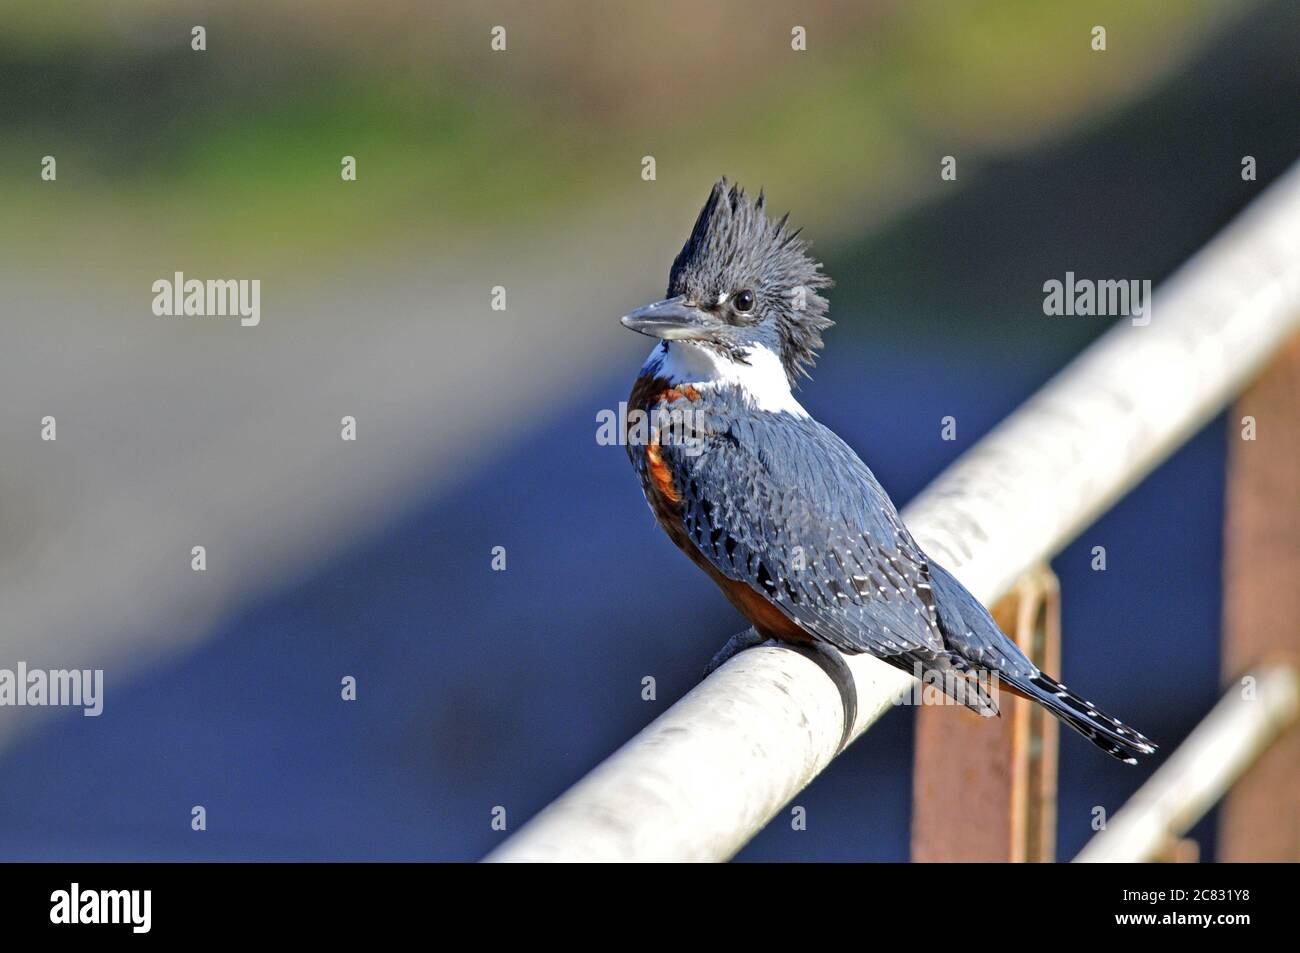 Selective focus shot of a cute belted kingfisher bird on a white railing Stock Photo